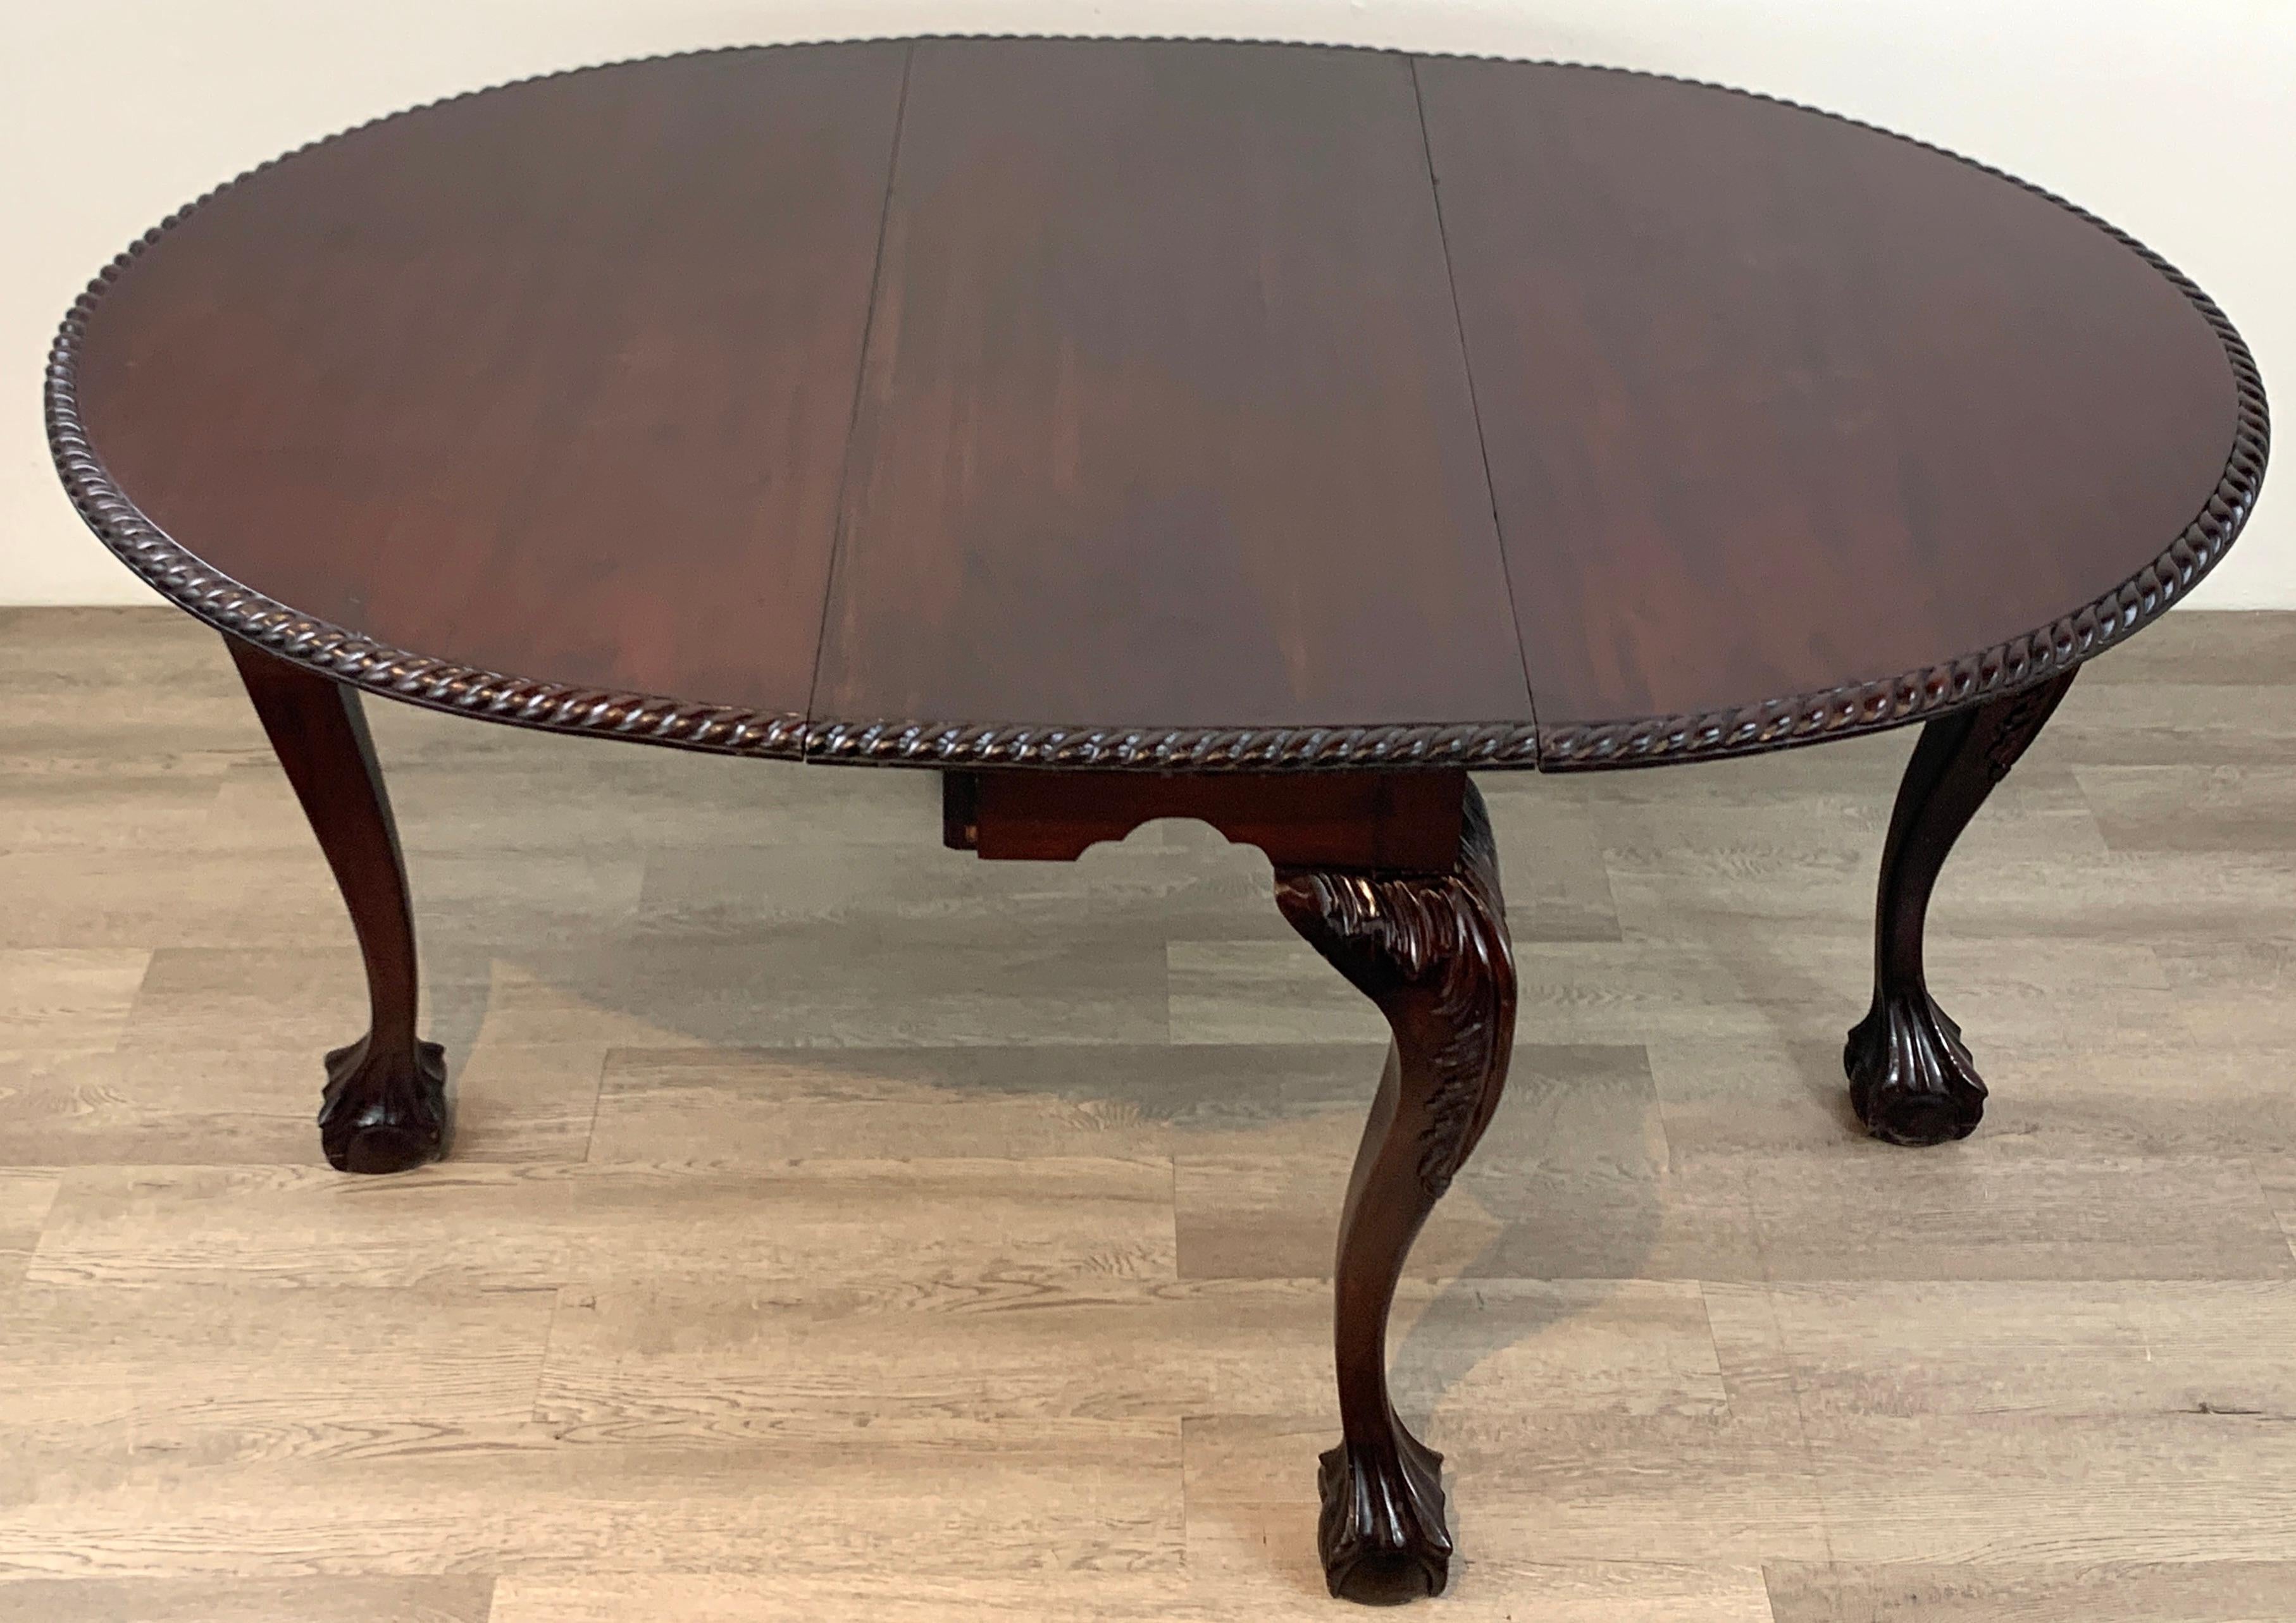 19th Century English Mahogany Ball & Claw Foot Tuck Away Dining Room Table For Sale 4